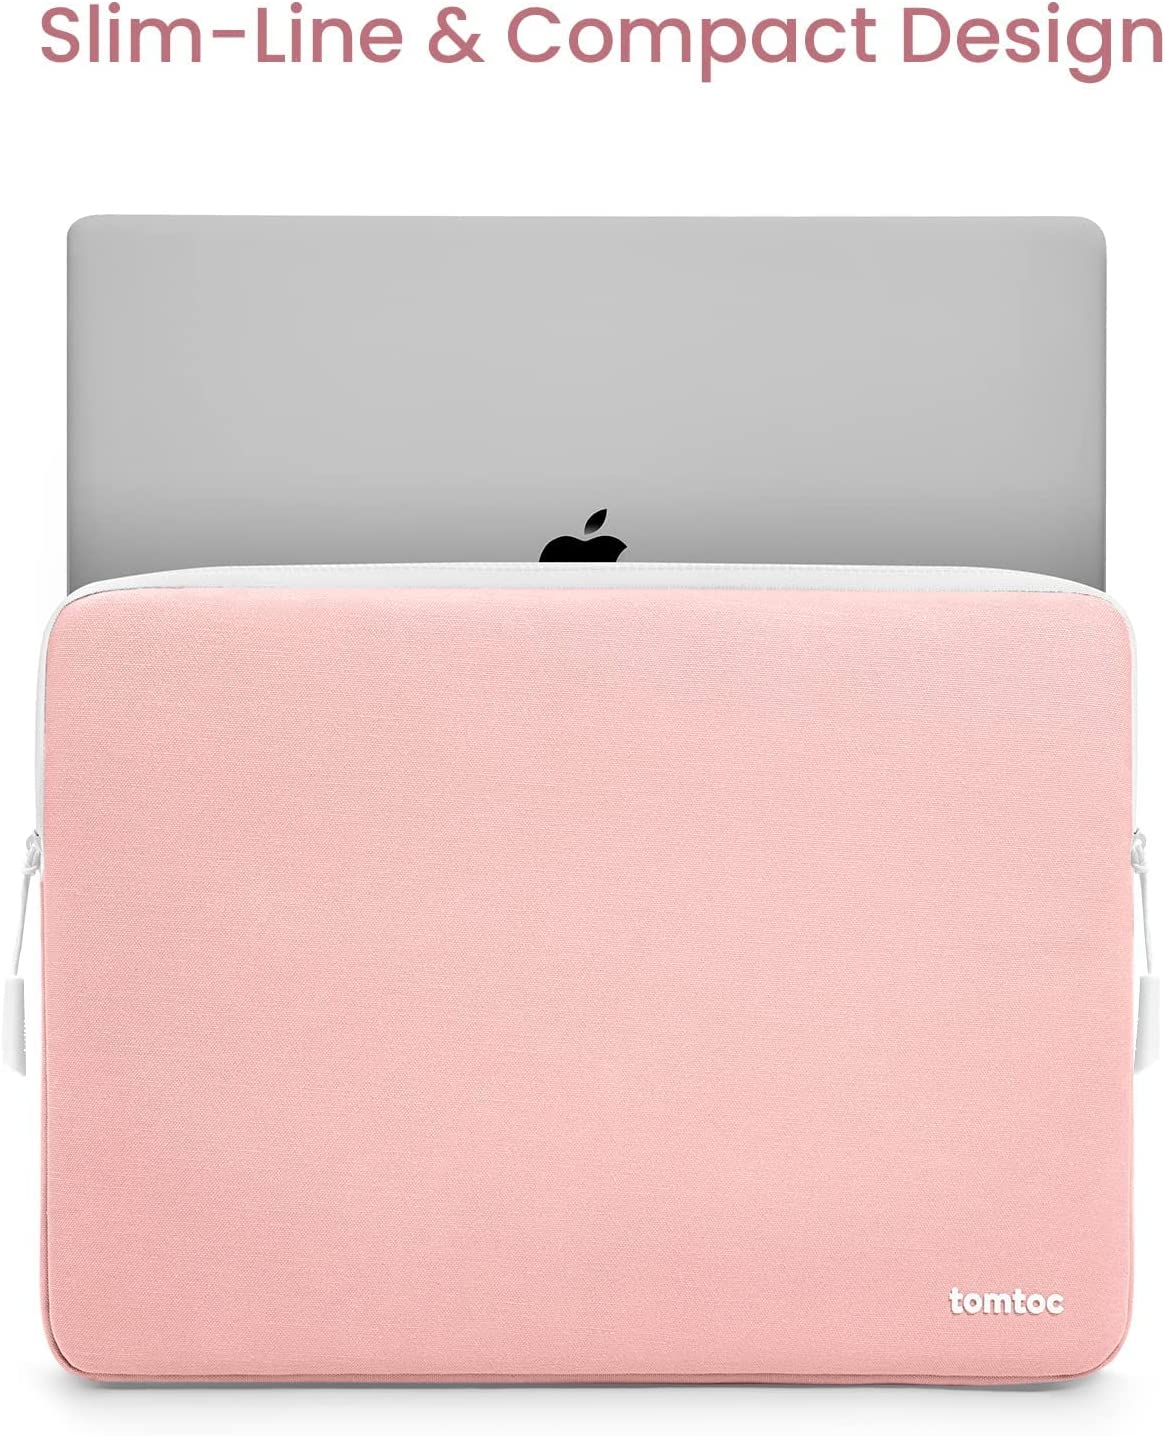 Tomtoc TheHer-A27 Shell Laptop Sleeve Kit 13 inch - Pink